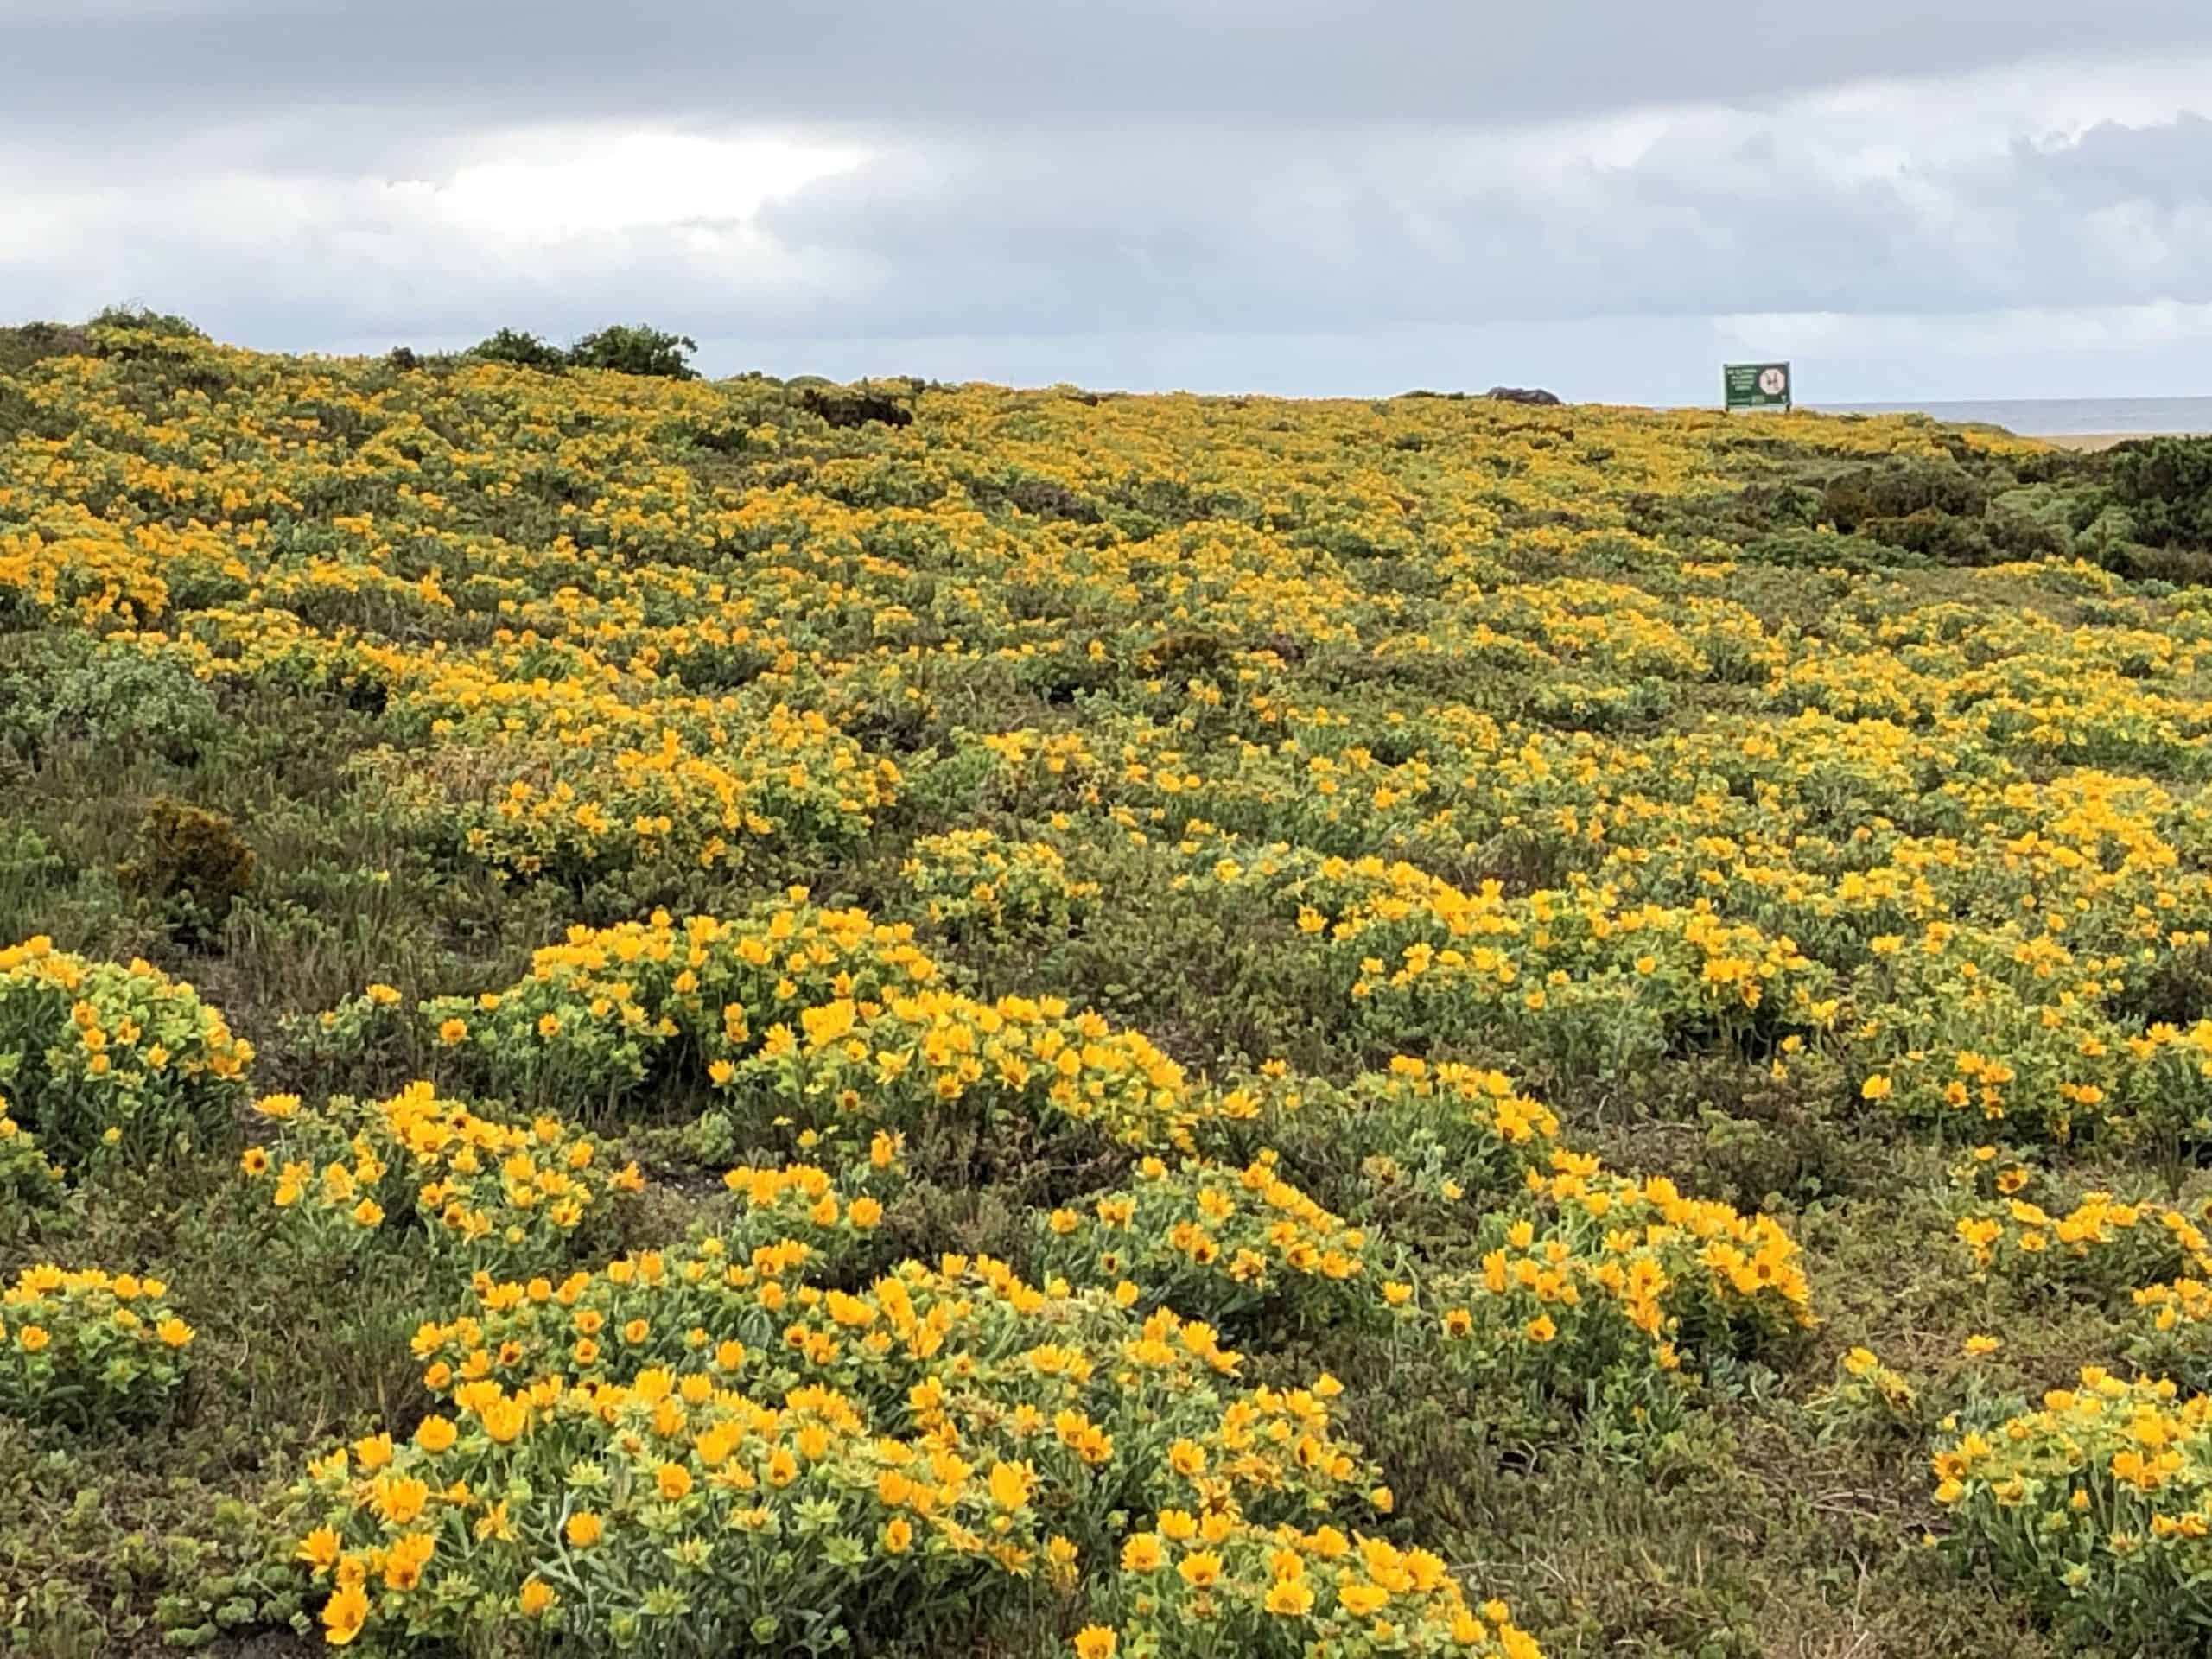 West Coast Cycling through wildflowers in Spring